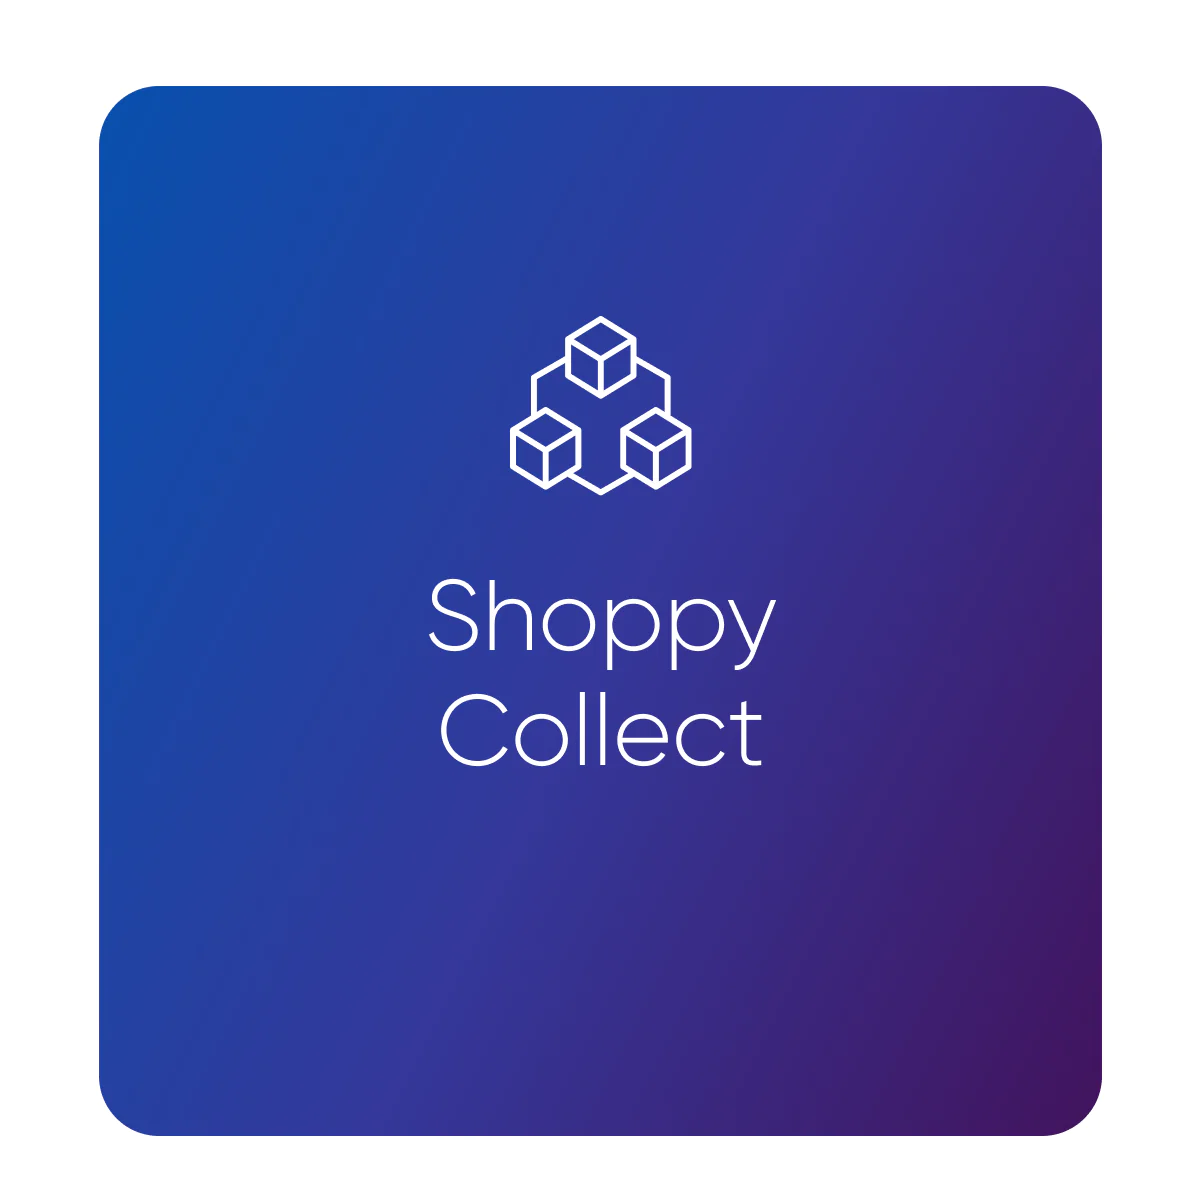 Shoppy Collect Instore Pickup for Shopify